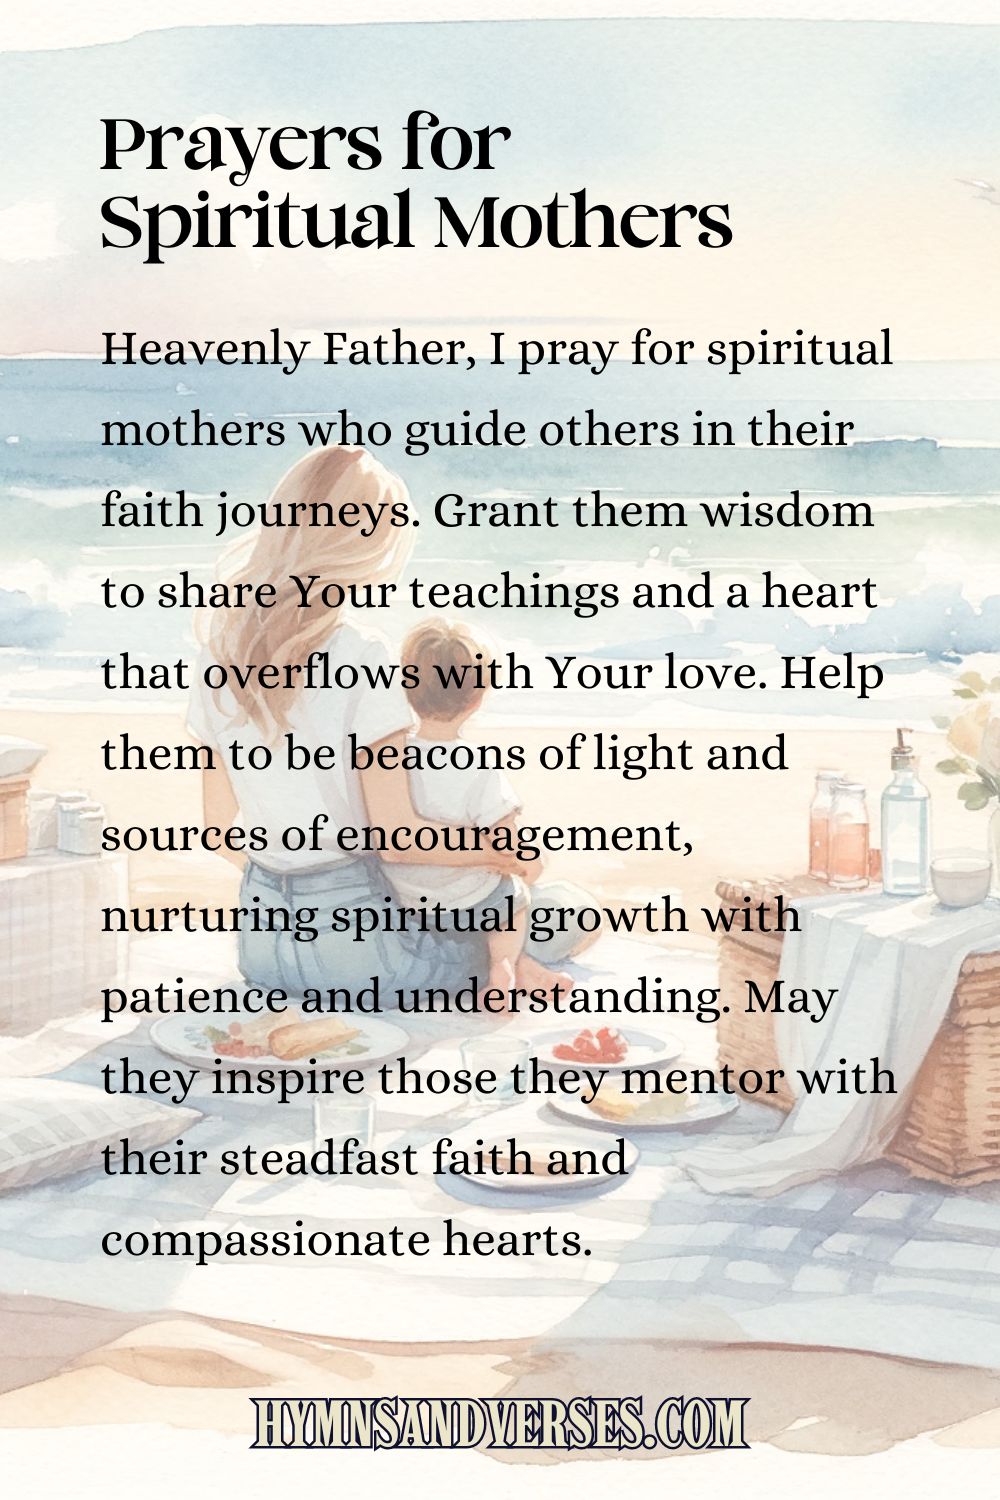 Pin image for Prayers for Spiritual Mothers, reads: Heavenly Father, I pray for spiritual mothers who guide others in their faith journeys. Grant them wisdom to share Your teachings and a heart that overflows with Your love. Help them to be beacons of light and sources of encouragement, nurturing spiritual growth with patience and understanding. May they inspire those they mentor with their steadfast faith and compassionate hearts.